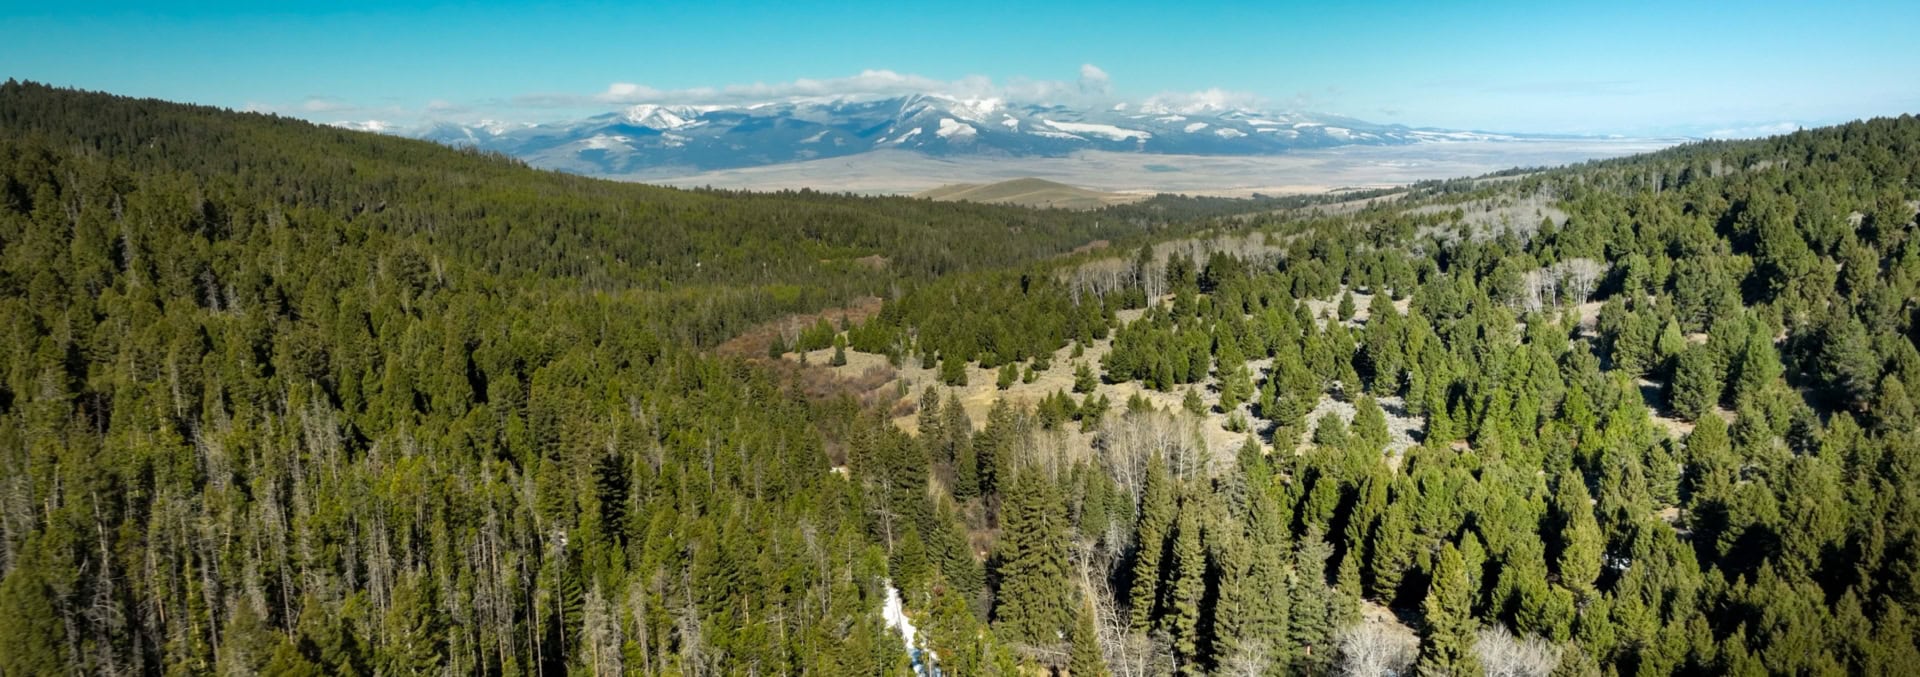 montana hunting property for sale burnt hollow ranch feature